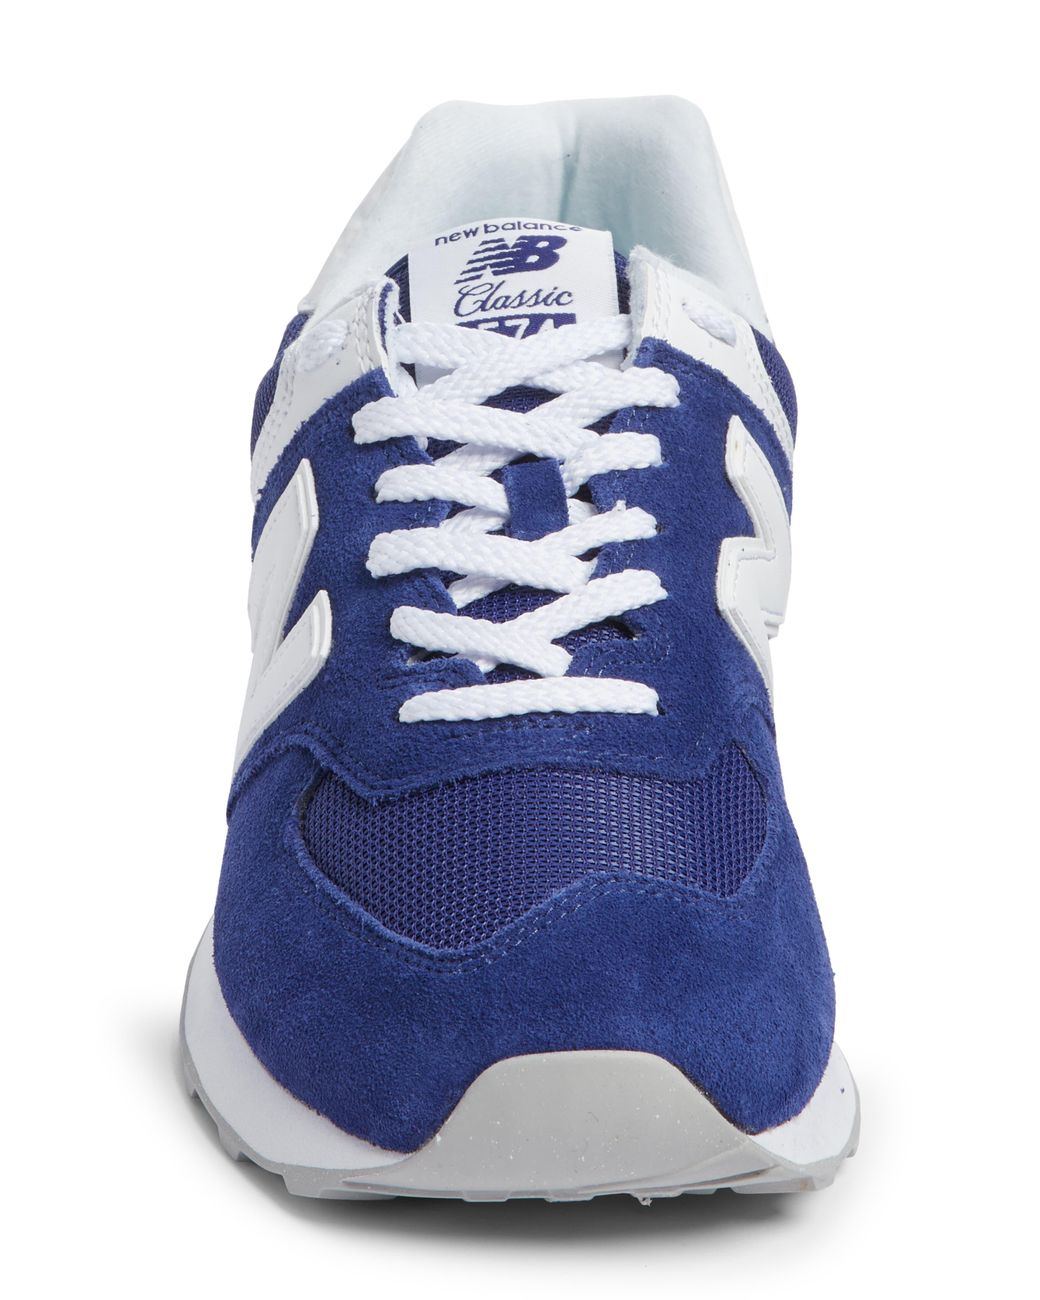 New Balance 574 Classic Sneaker In Blue/white At Nordstrom Rack | Lyst